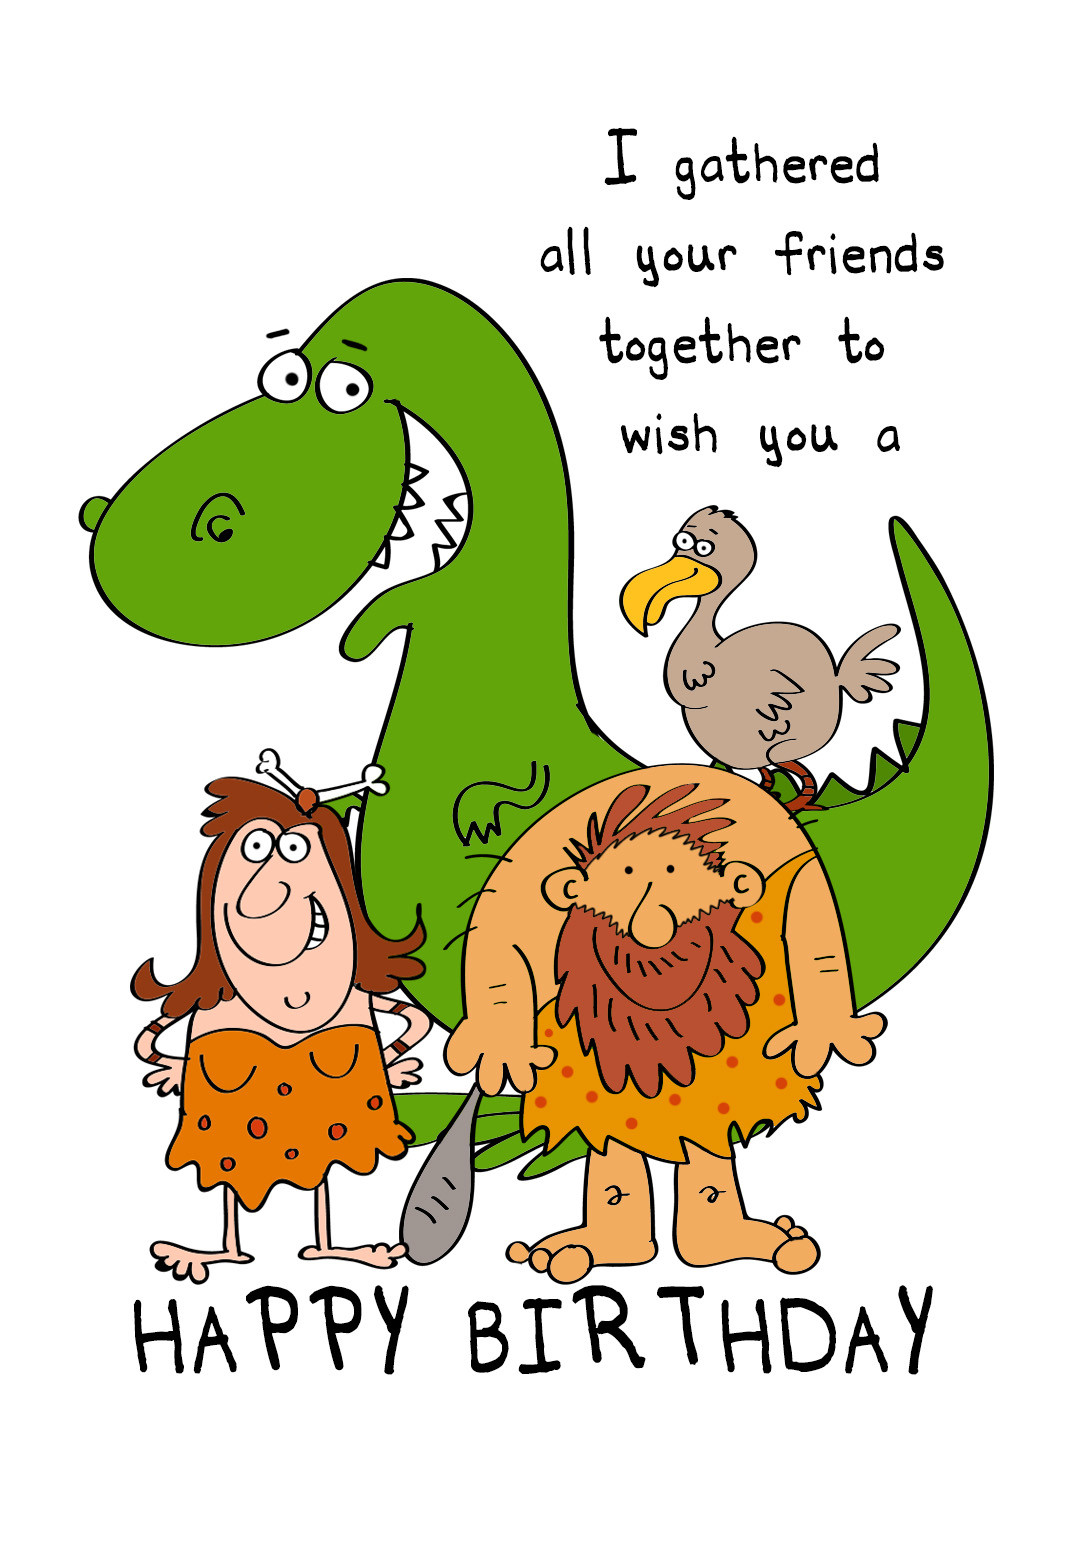 Funny Printable Birthday Card
 Friends Gathered To her Free Birthday Card